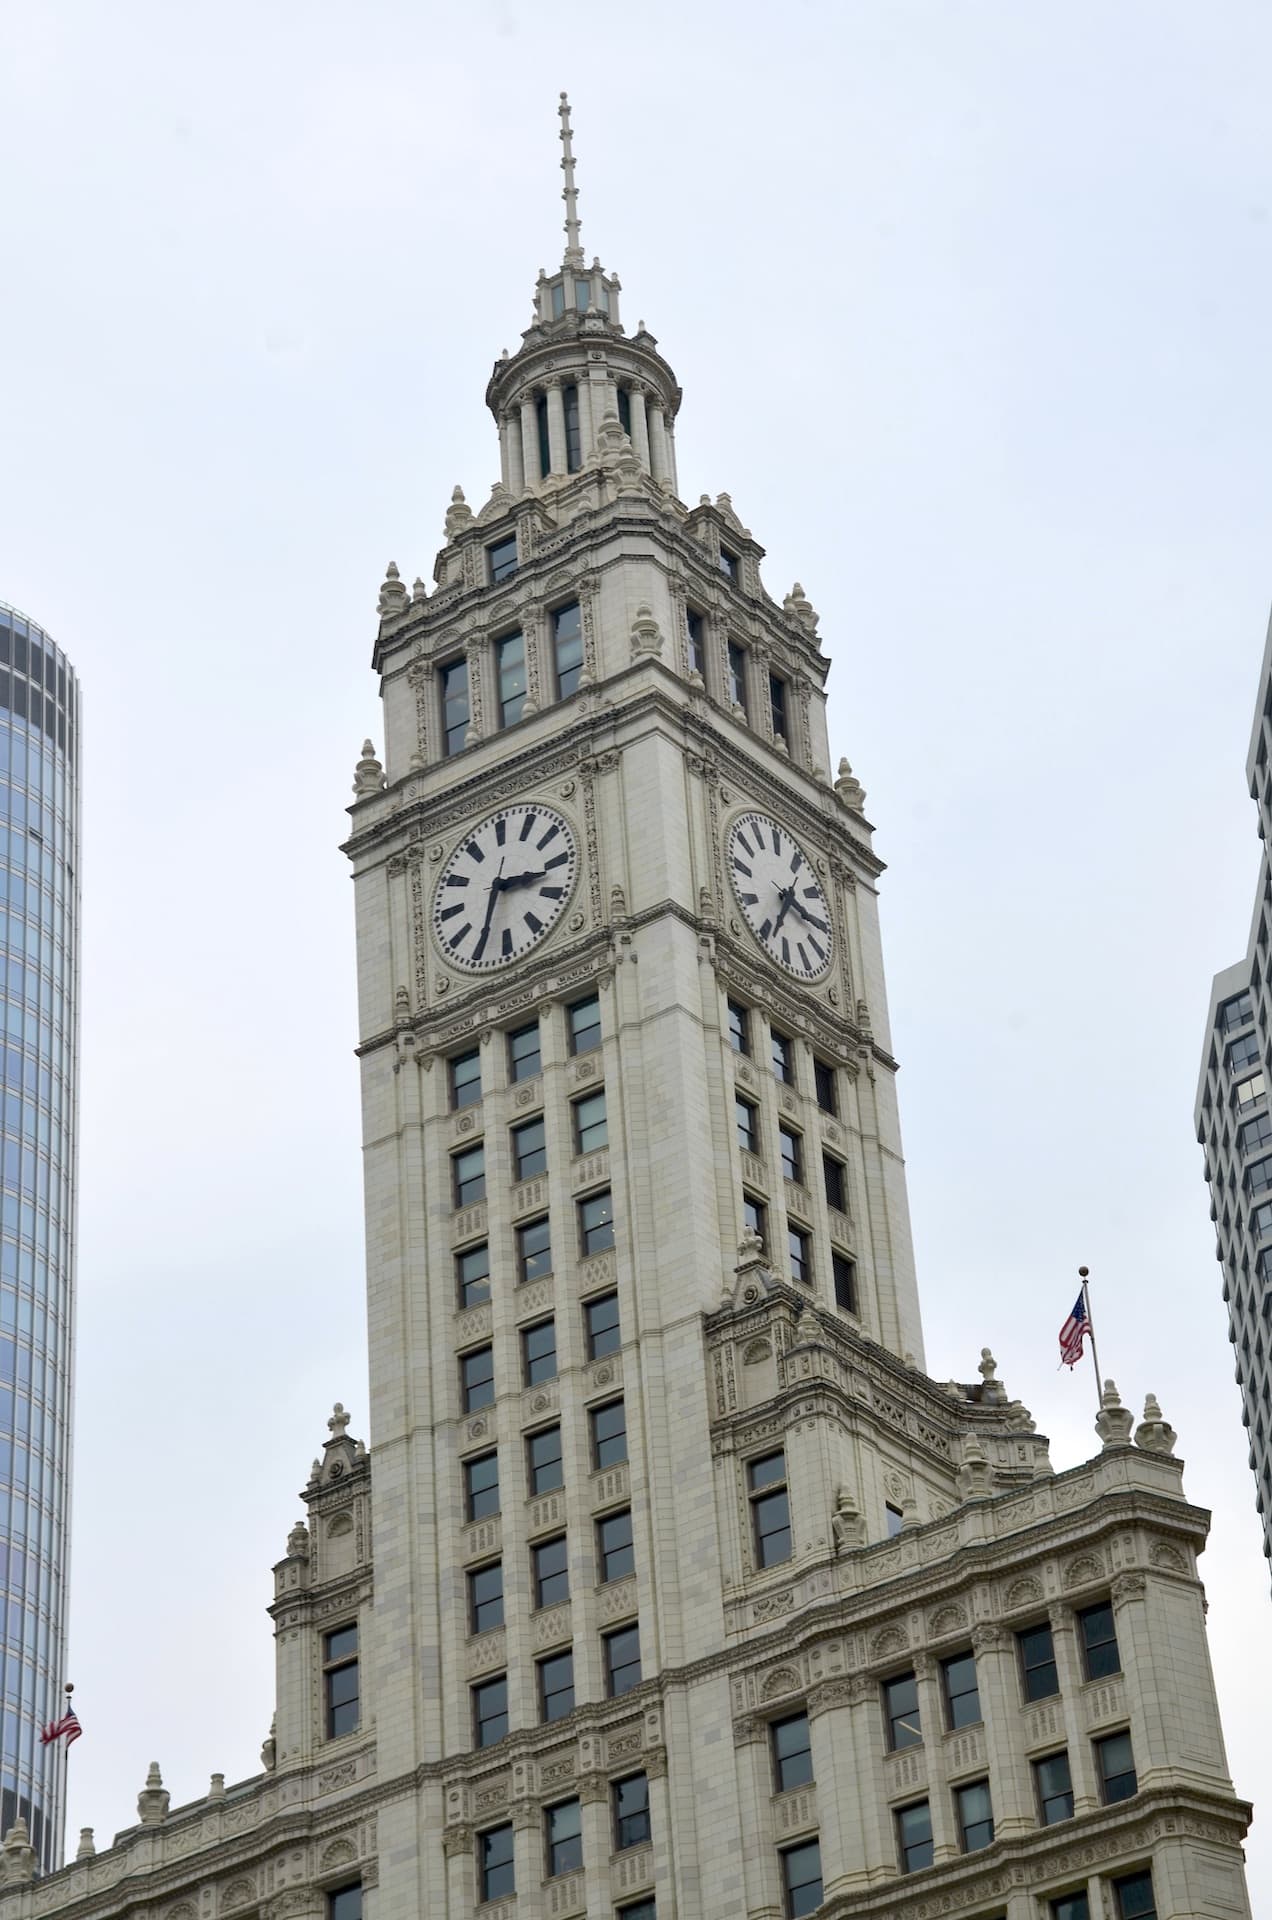 South tower of the Wrigley Building in Chicago, Illinois